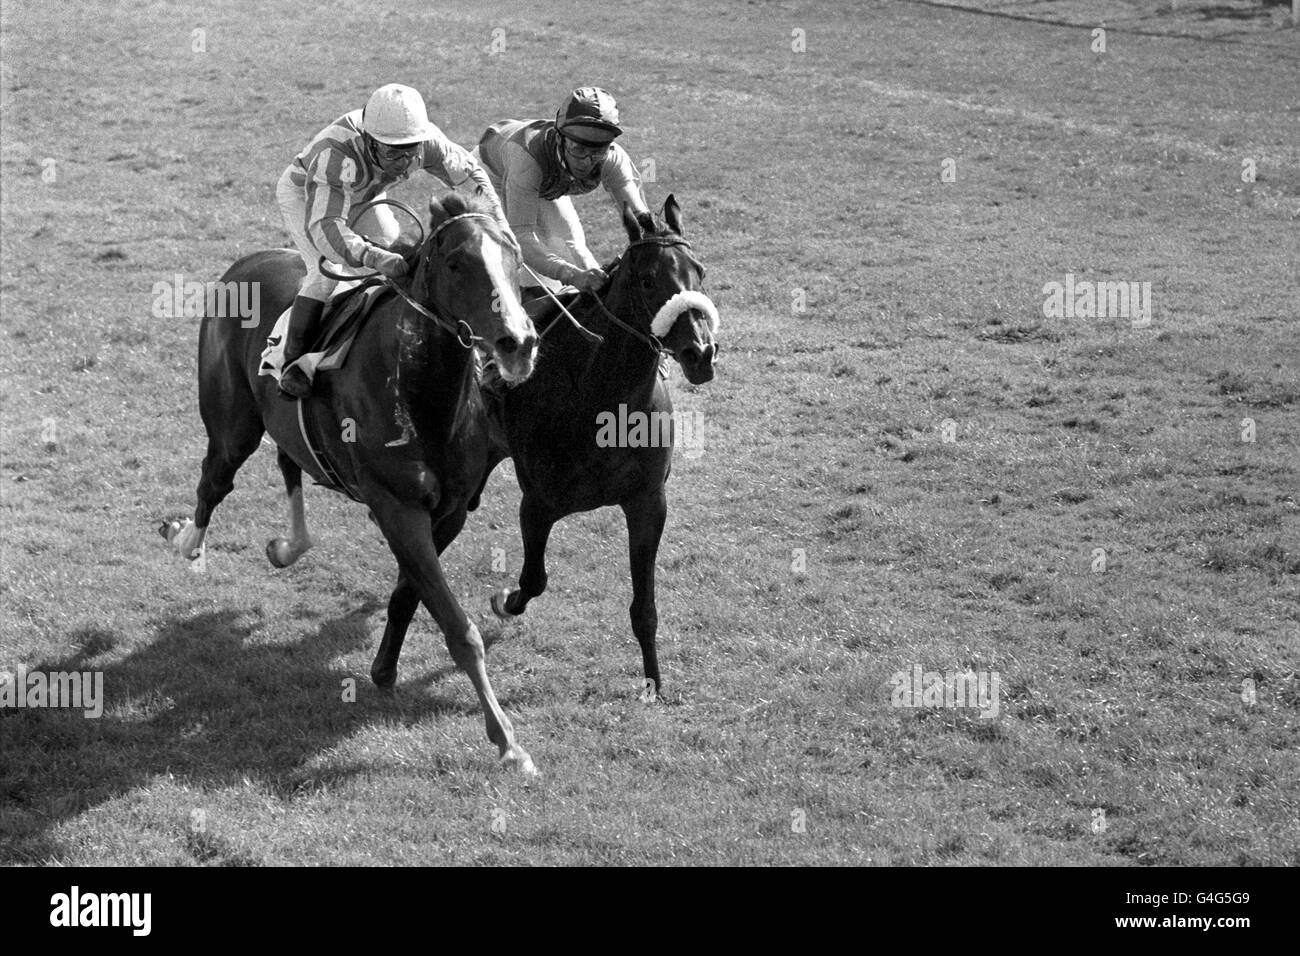 Redundant, ridden by Geoff Lewis (left), comes in first to win the September Handicap. Less than a pace behind is runner up Relkalim, ridden by Brian Taylor. The meeting had been transferred to Kempton from Sandown Stock Photo